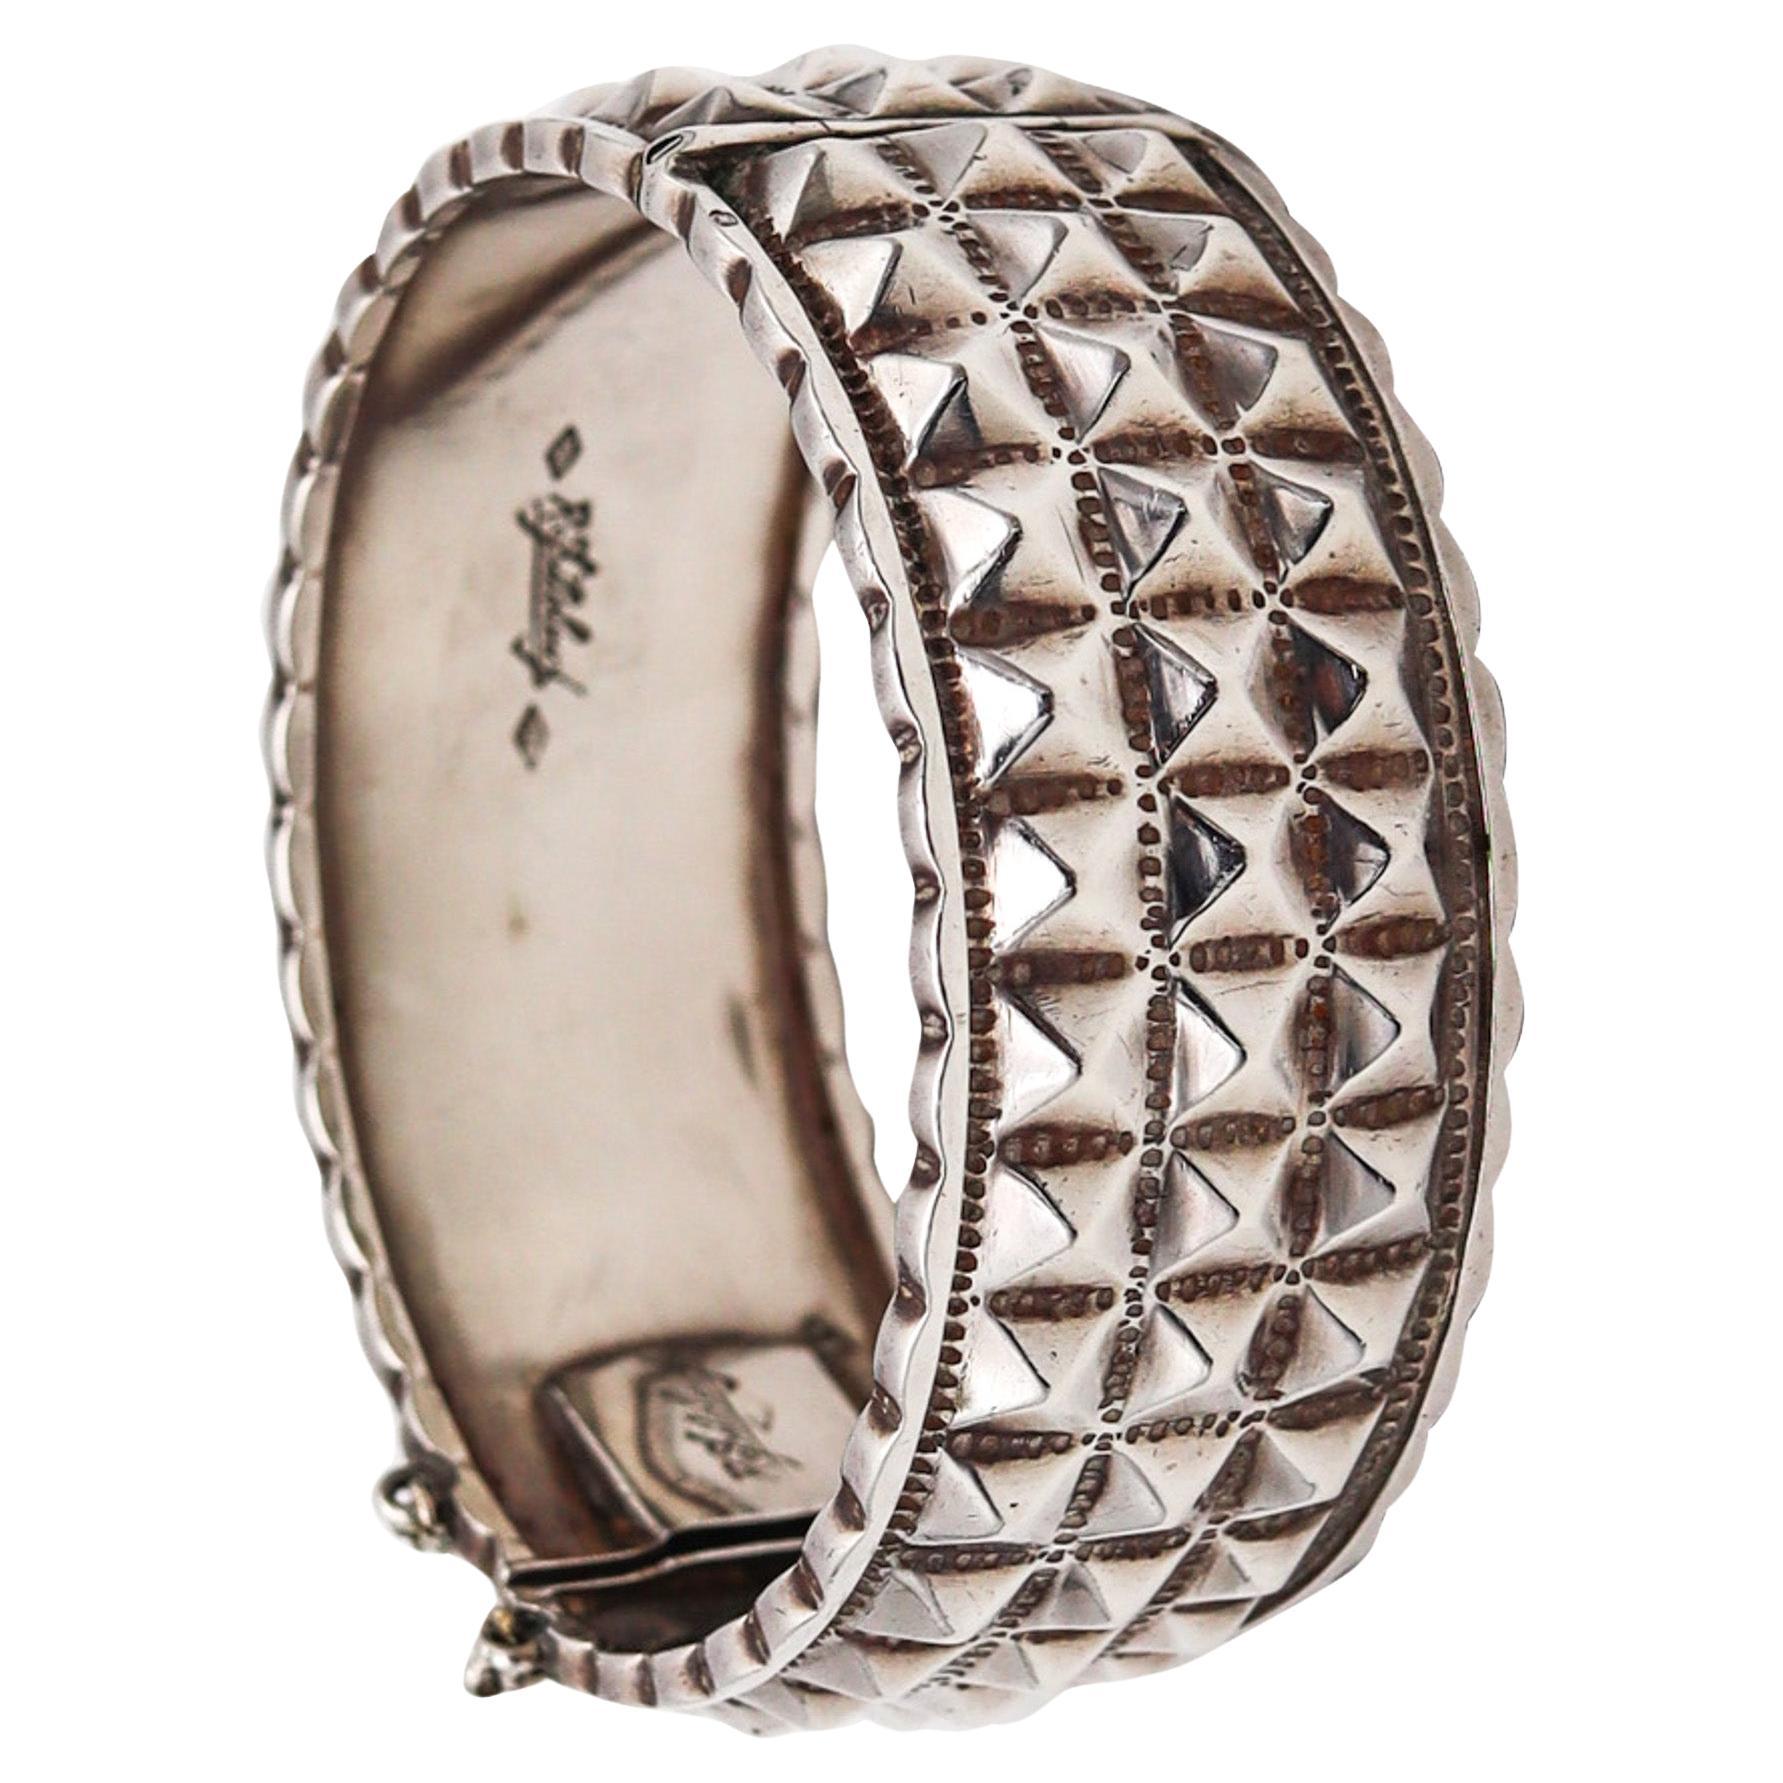 Rene Sitoleux 1935 Paris French Art Deco Geometric Bangle Bracelet In 800 Silver For Sale